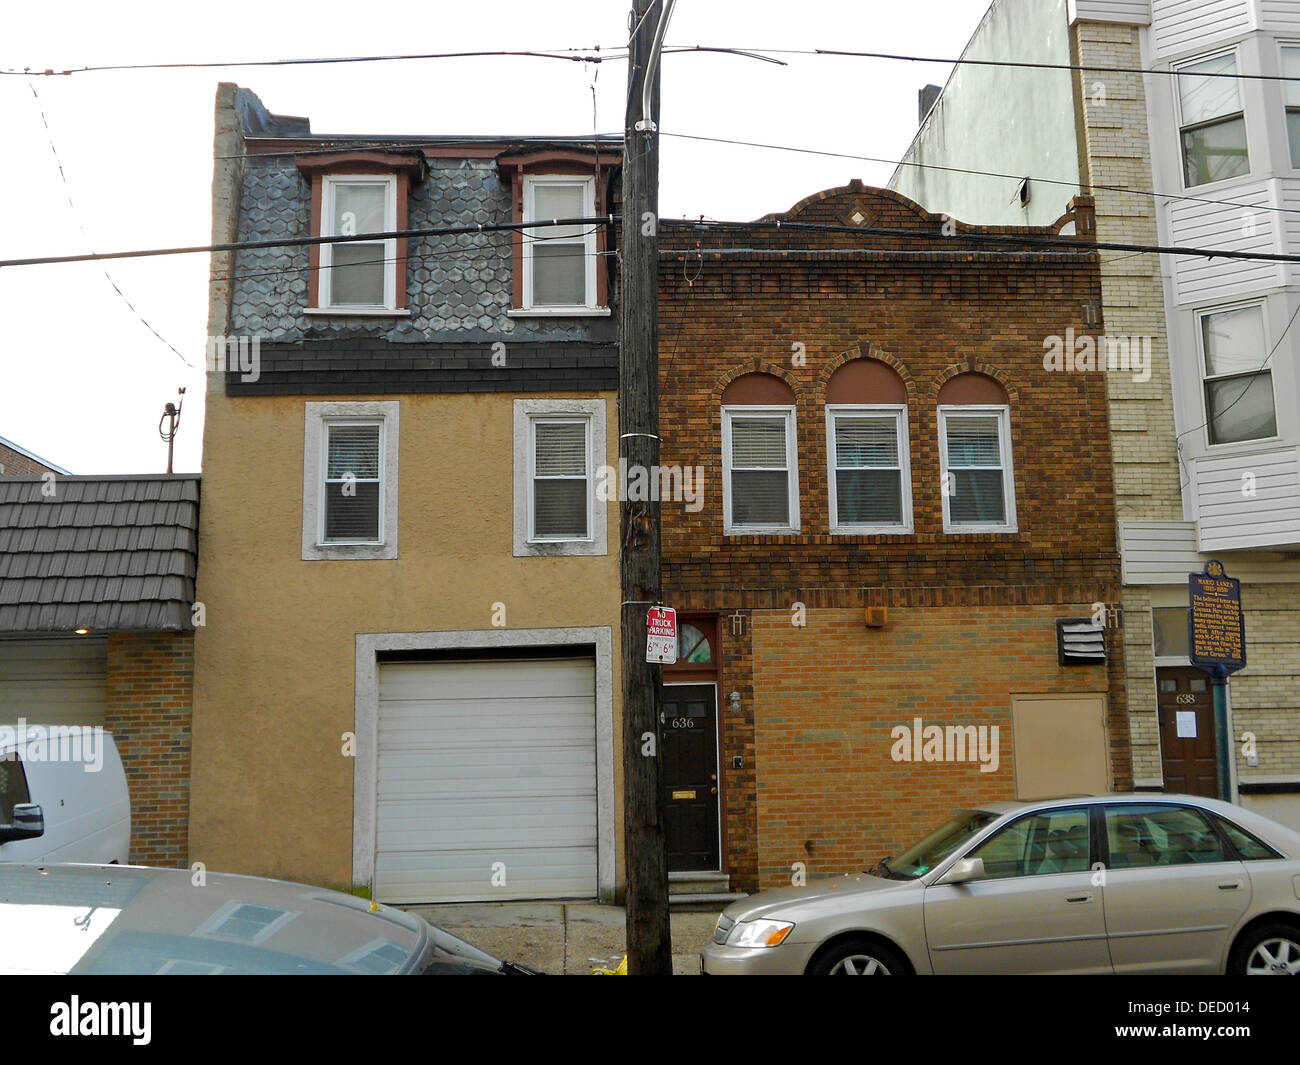 The birthplace of Philadelphia tenor Mario Lanza at 634 Christian Street (on left) or perhaps 636 (on right) , Philadelphia, Pennsylvania USA. The 2 buildings appear to be joined now, but I believe it's the 634 building. Stock Photo